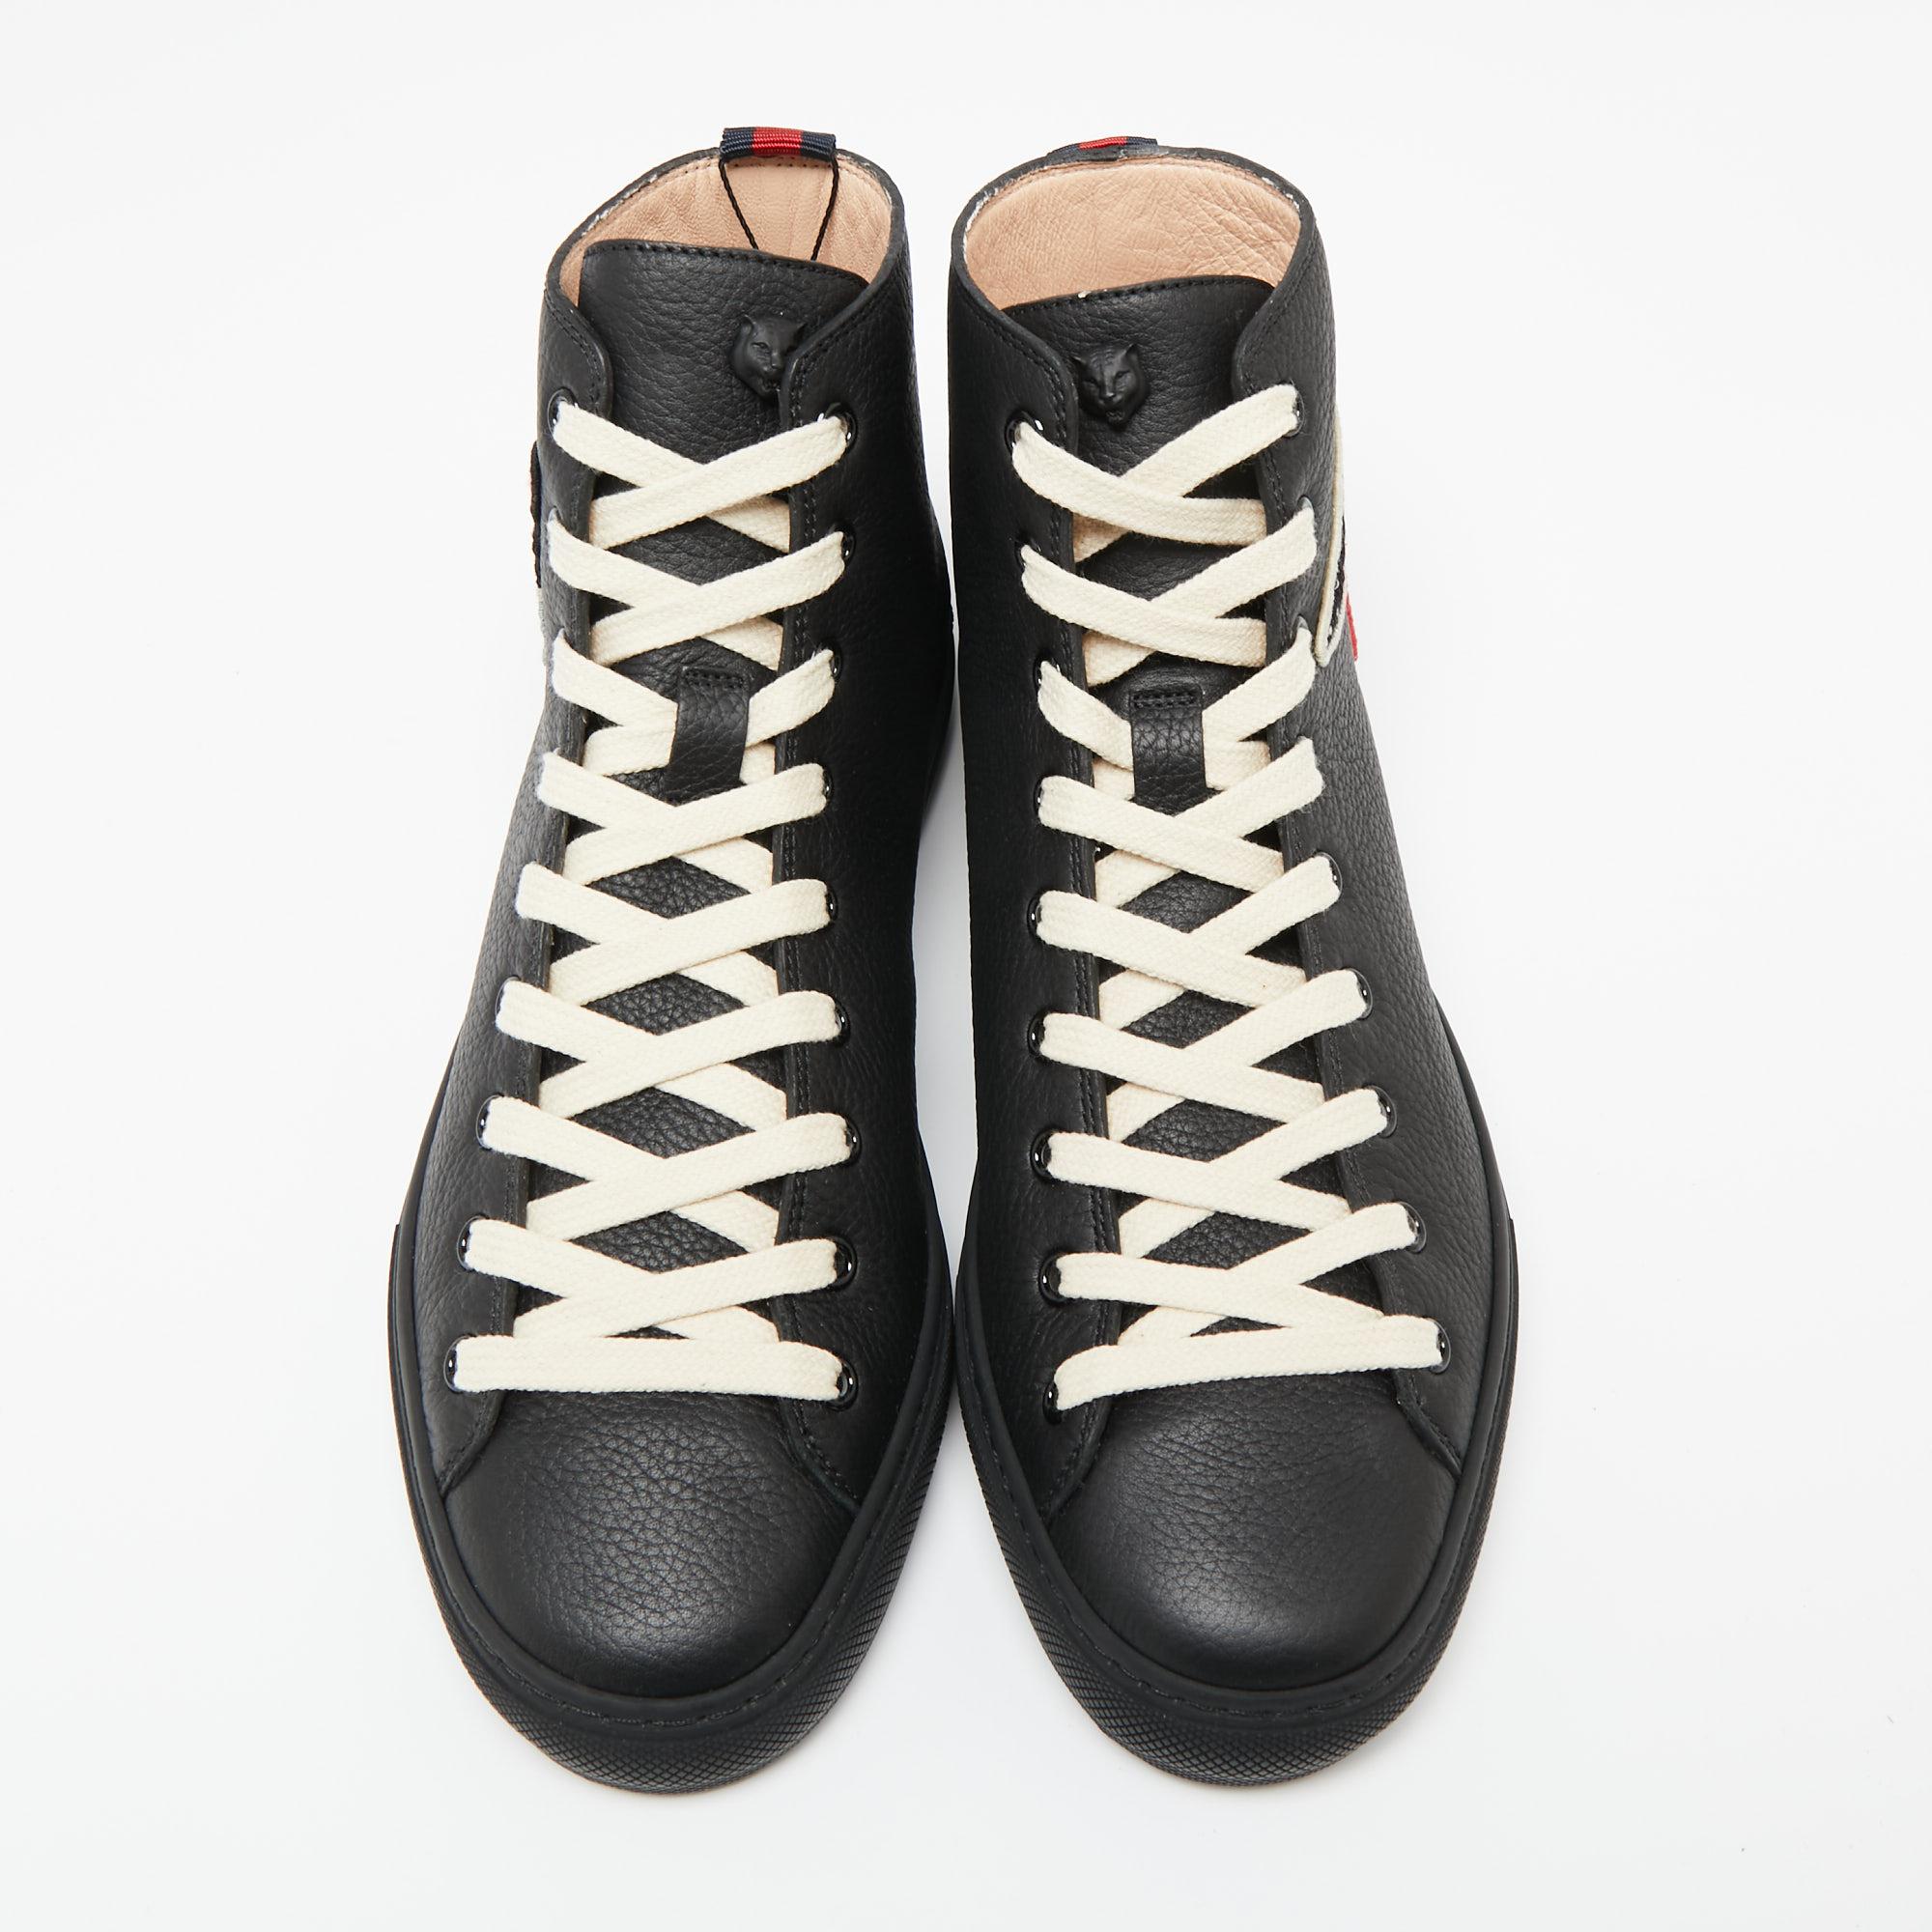 Black High Top Gucci Sneakers - 14 For Sale on 1stDibs | gucci high top  sneakers black, gucci black high top sneakers, black gucci high top sneakers